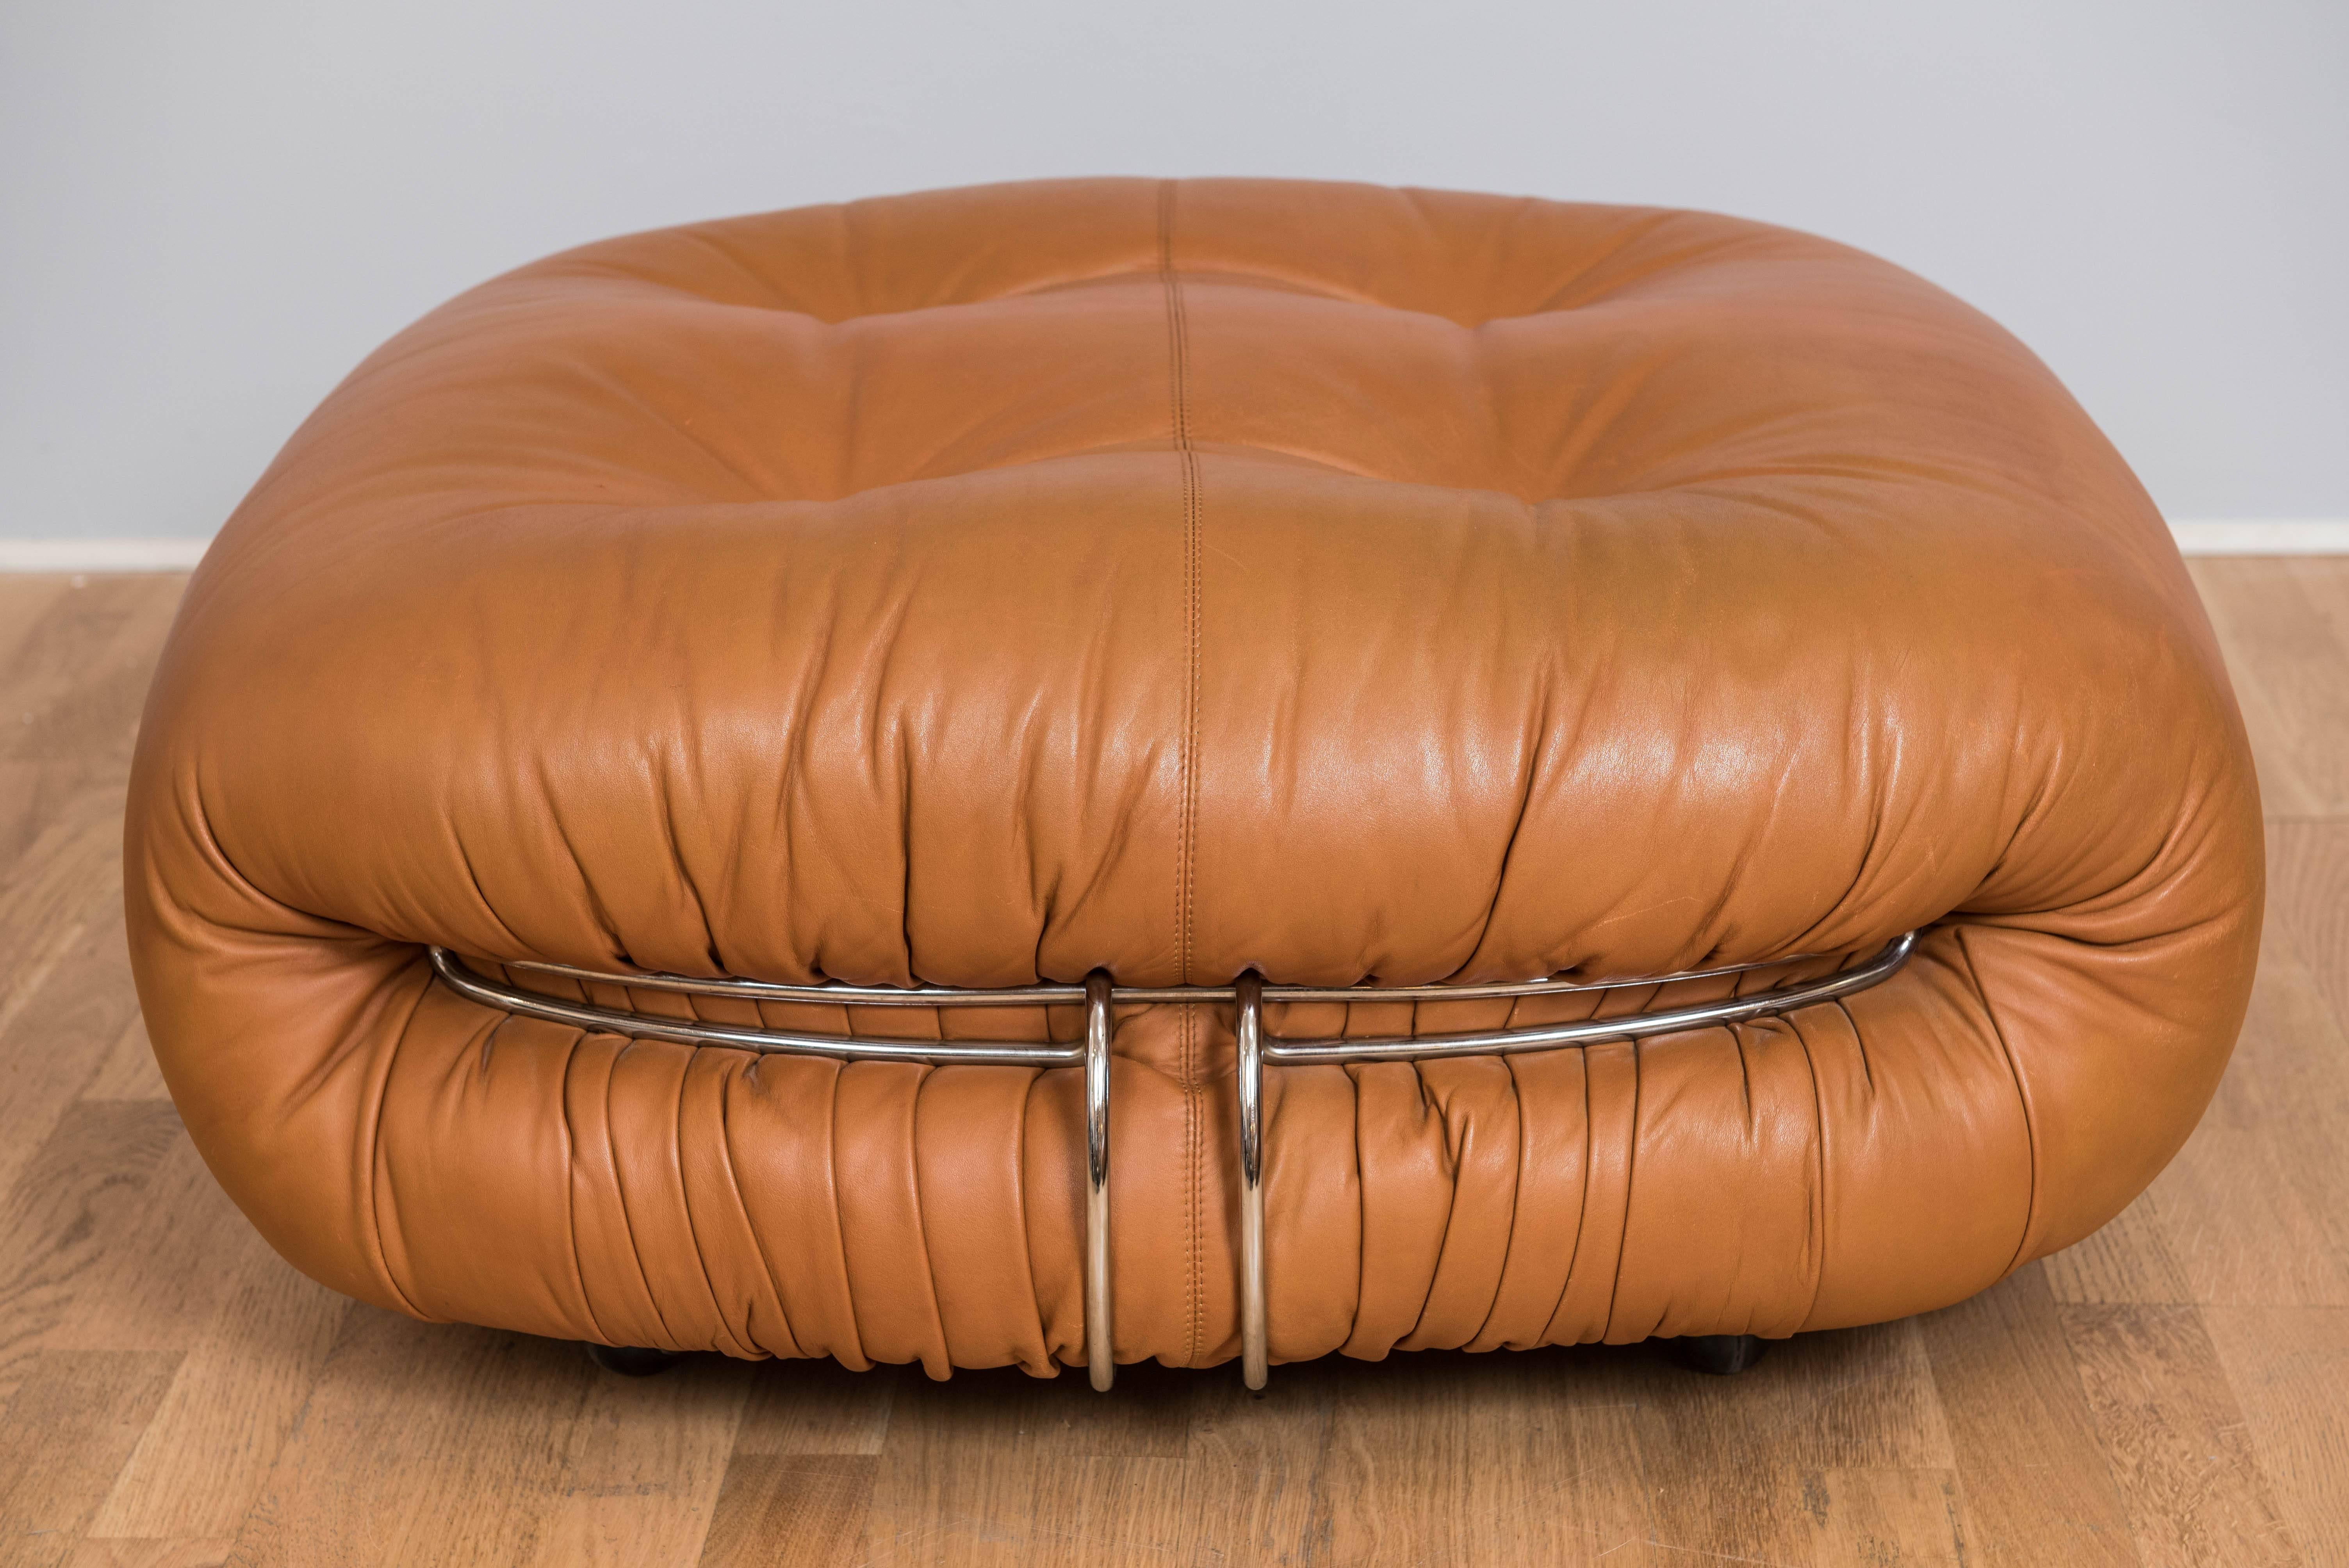 This multi-functional ottoman in a rich caramel colored leather is designed by Afra and Tobia Scarpa for luxury furniture and design manufacturer Cassina of Italy in the 1970s. It compliments many design forward rooms and matches the
Soriana sofa